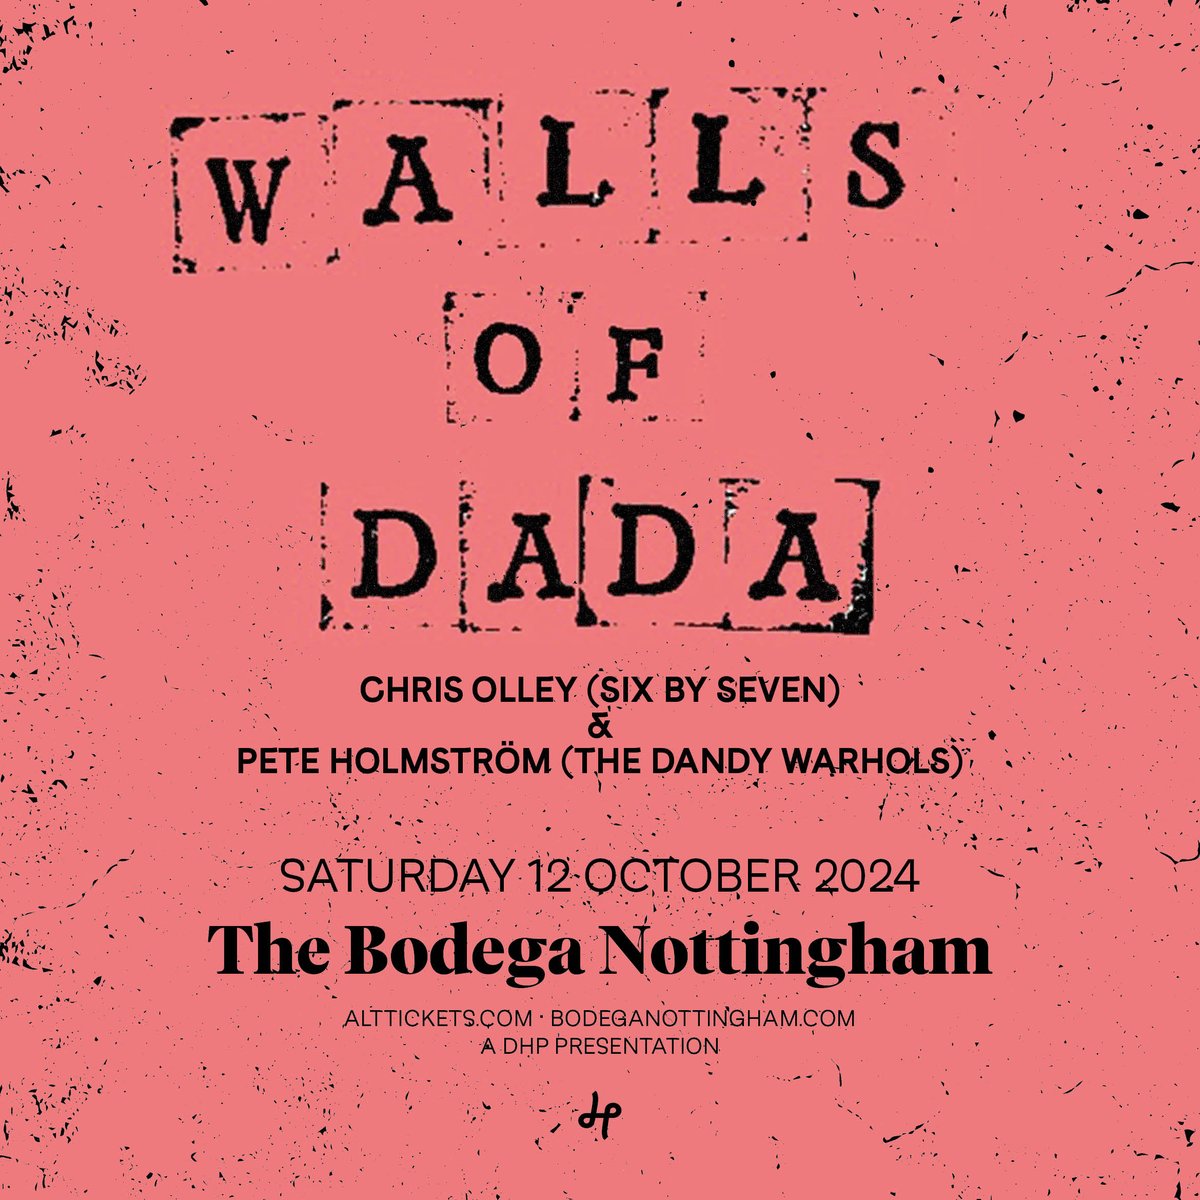 The cold wave project of Chris Olley (Six By Seven) and Pete Holmström (The Dandy Warhols), Walls Of Dada play @bodeganotts on Saturday 12th October! Tickets are on sale now: tinyurl.com/2n4jsetj